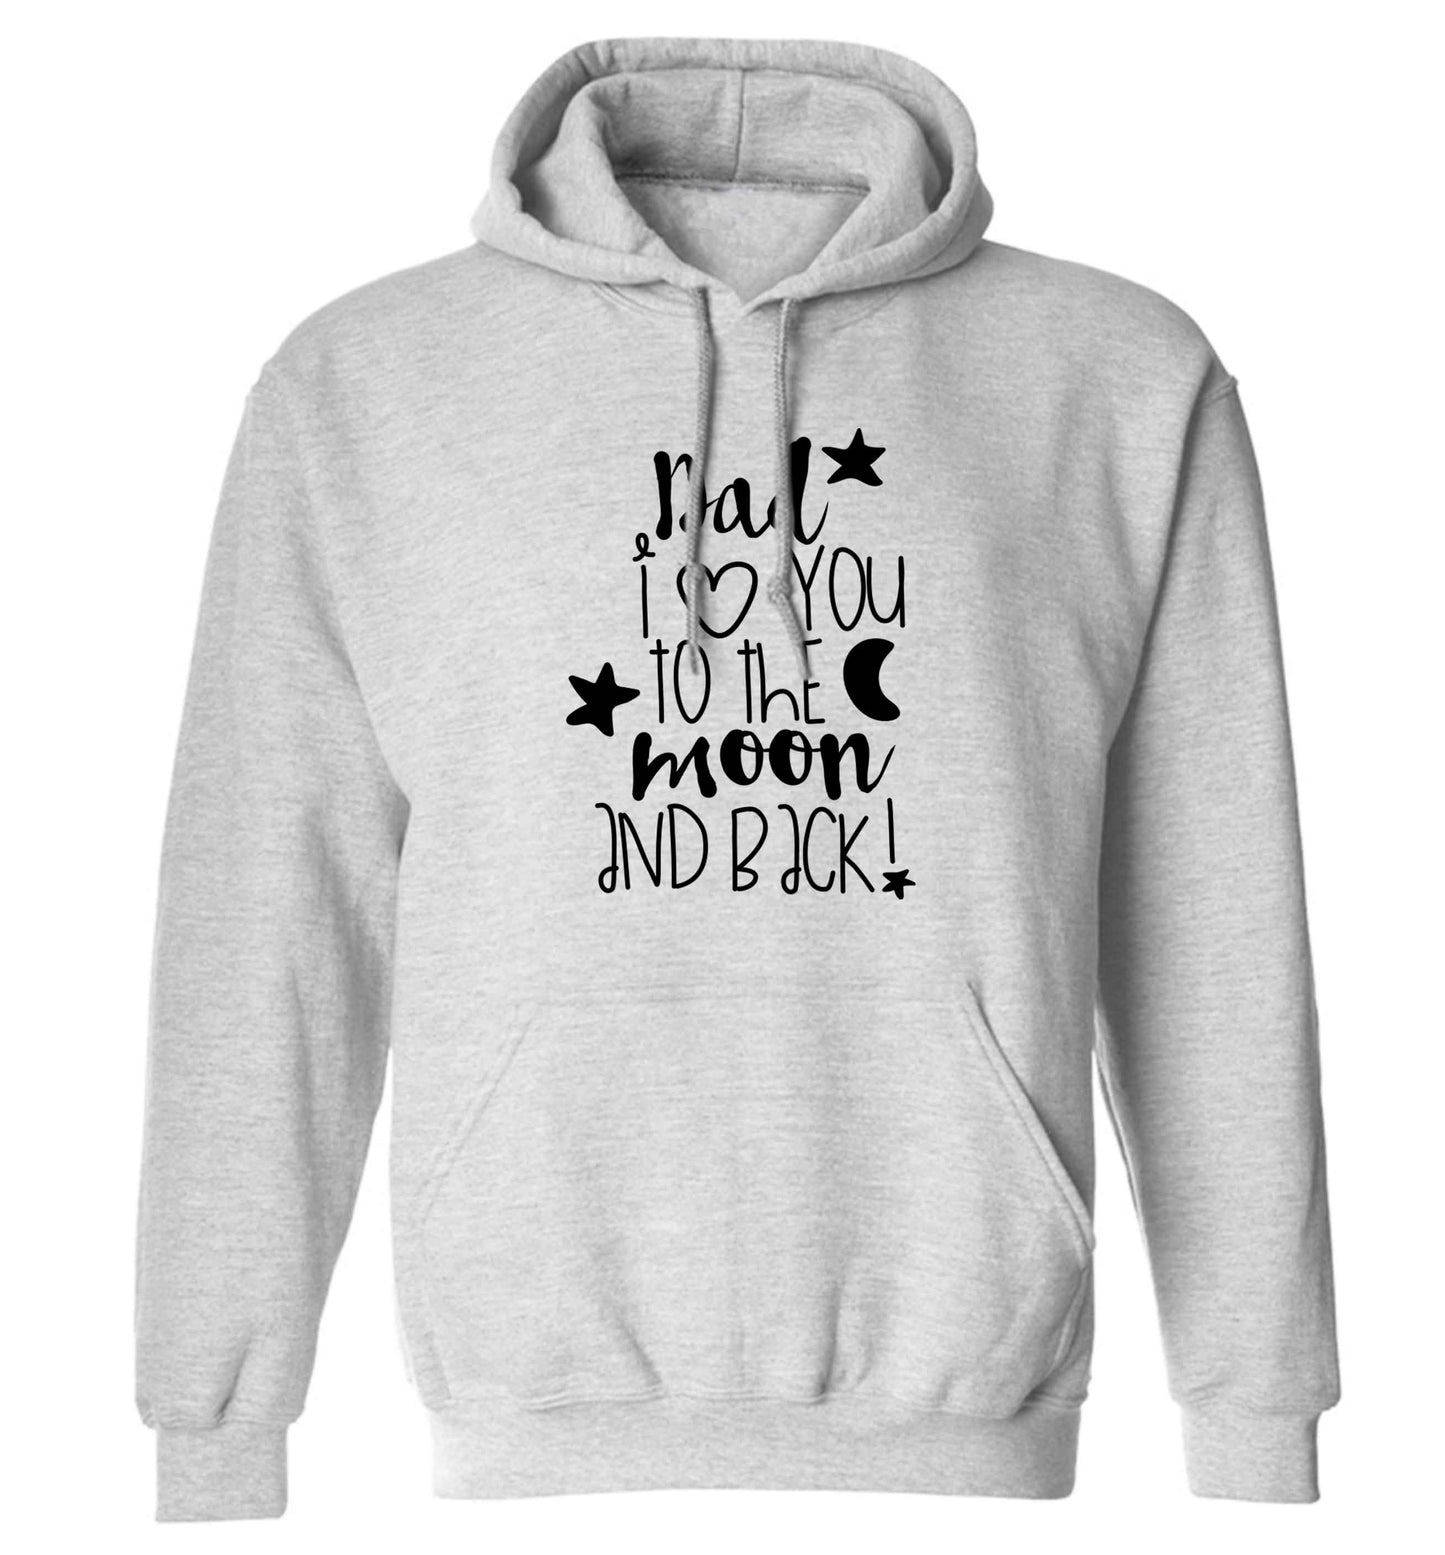 Dad I love you to the moon and back adults unisex grey hoodie 2XL